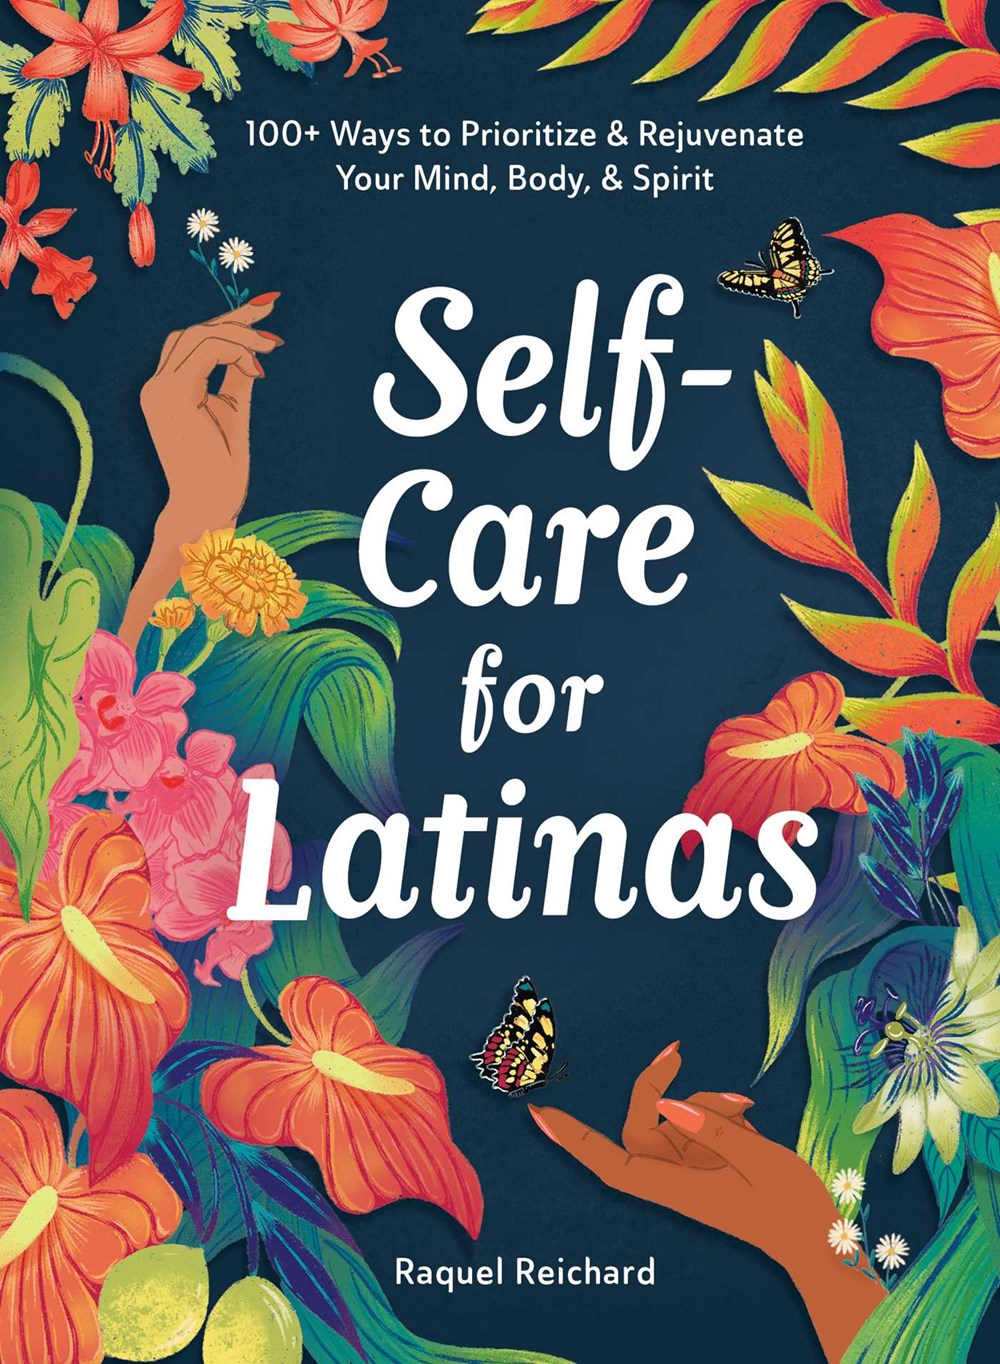 Self-Care for Latinas: 100+ Ways to Prioritize & Rejuvenate Your Mind, Body & Spirit by Raquel Reichard (Hardcover)